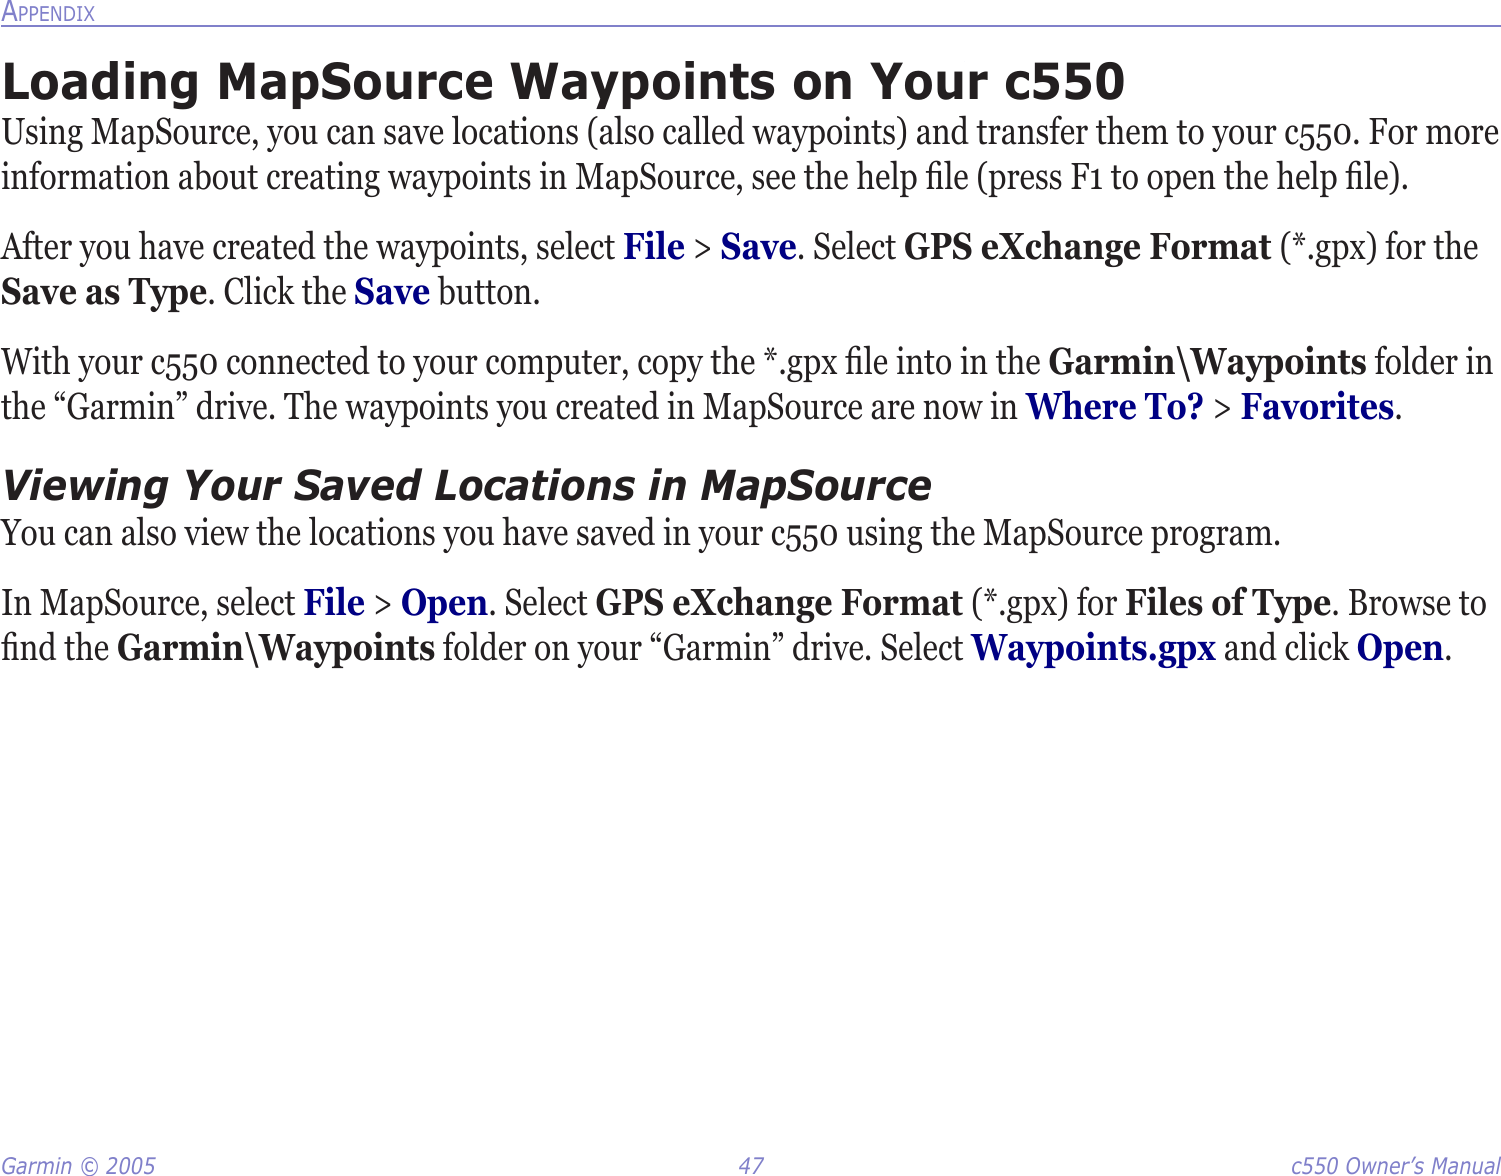 Garmin © 2005  47  c550 Owner’s ManualAPPENDIXLoading MapSource Waypoints on Your c550Using MapSource, you can save locations (also called waypoints) and transfer them to your c550. For more information about creating waypoints in MapSource, see the help ﬁle (press F1 to open the help ﬁle). After you have created the waypoints, select File &gt; Save. Select GPS eXchange Format (*.gpx) for the Save as Type. Click the Save button. With your c550 connected to your computer, copy the *.gpx ﬁle into in the Garmin\Waypoints folder in the “Garmin” drive. The waypoints you created in MapSource are now in Where To? &gt; Favorites. Viewing Your Saved Locations in MapSourceYou can also view the locations you have saved in your c550 using the MapSource program. In MapSource, select File &gt; Open. Select GPS eXchange Format (*.gpx) for Files of Type. Browse to ﬁnd the Garmin\Waypoints folder on your “Garmin” drive. Select Waypoints.gpx and click Open. 